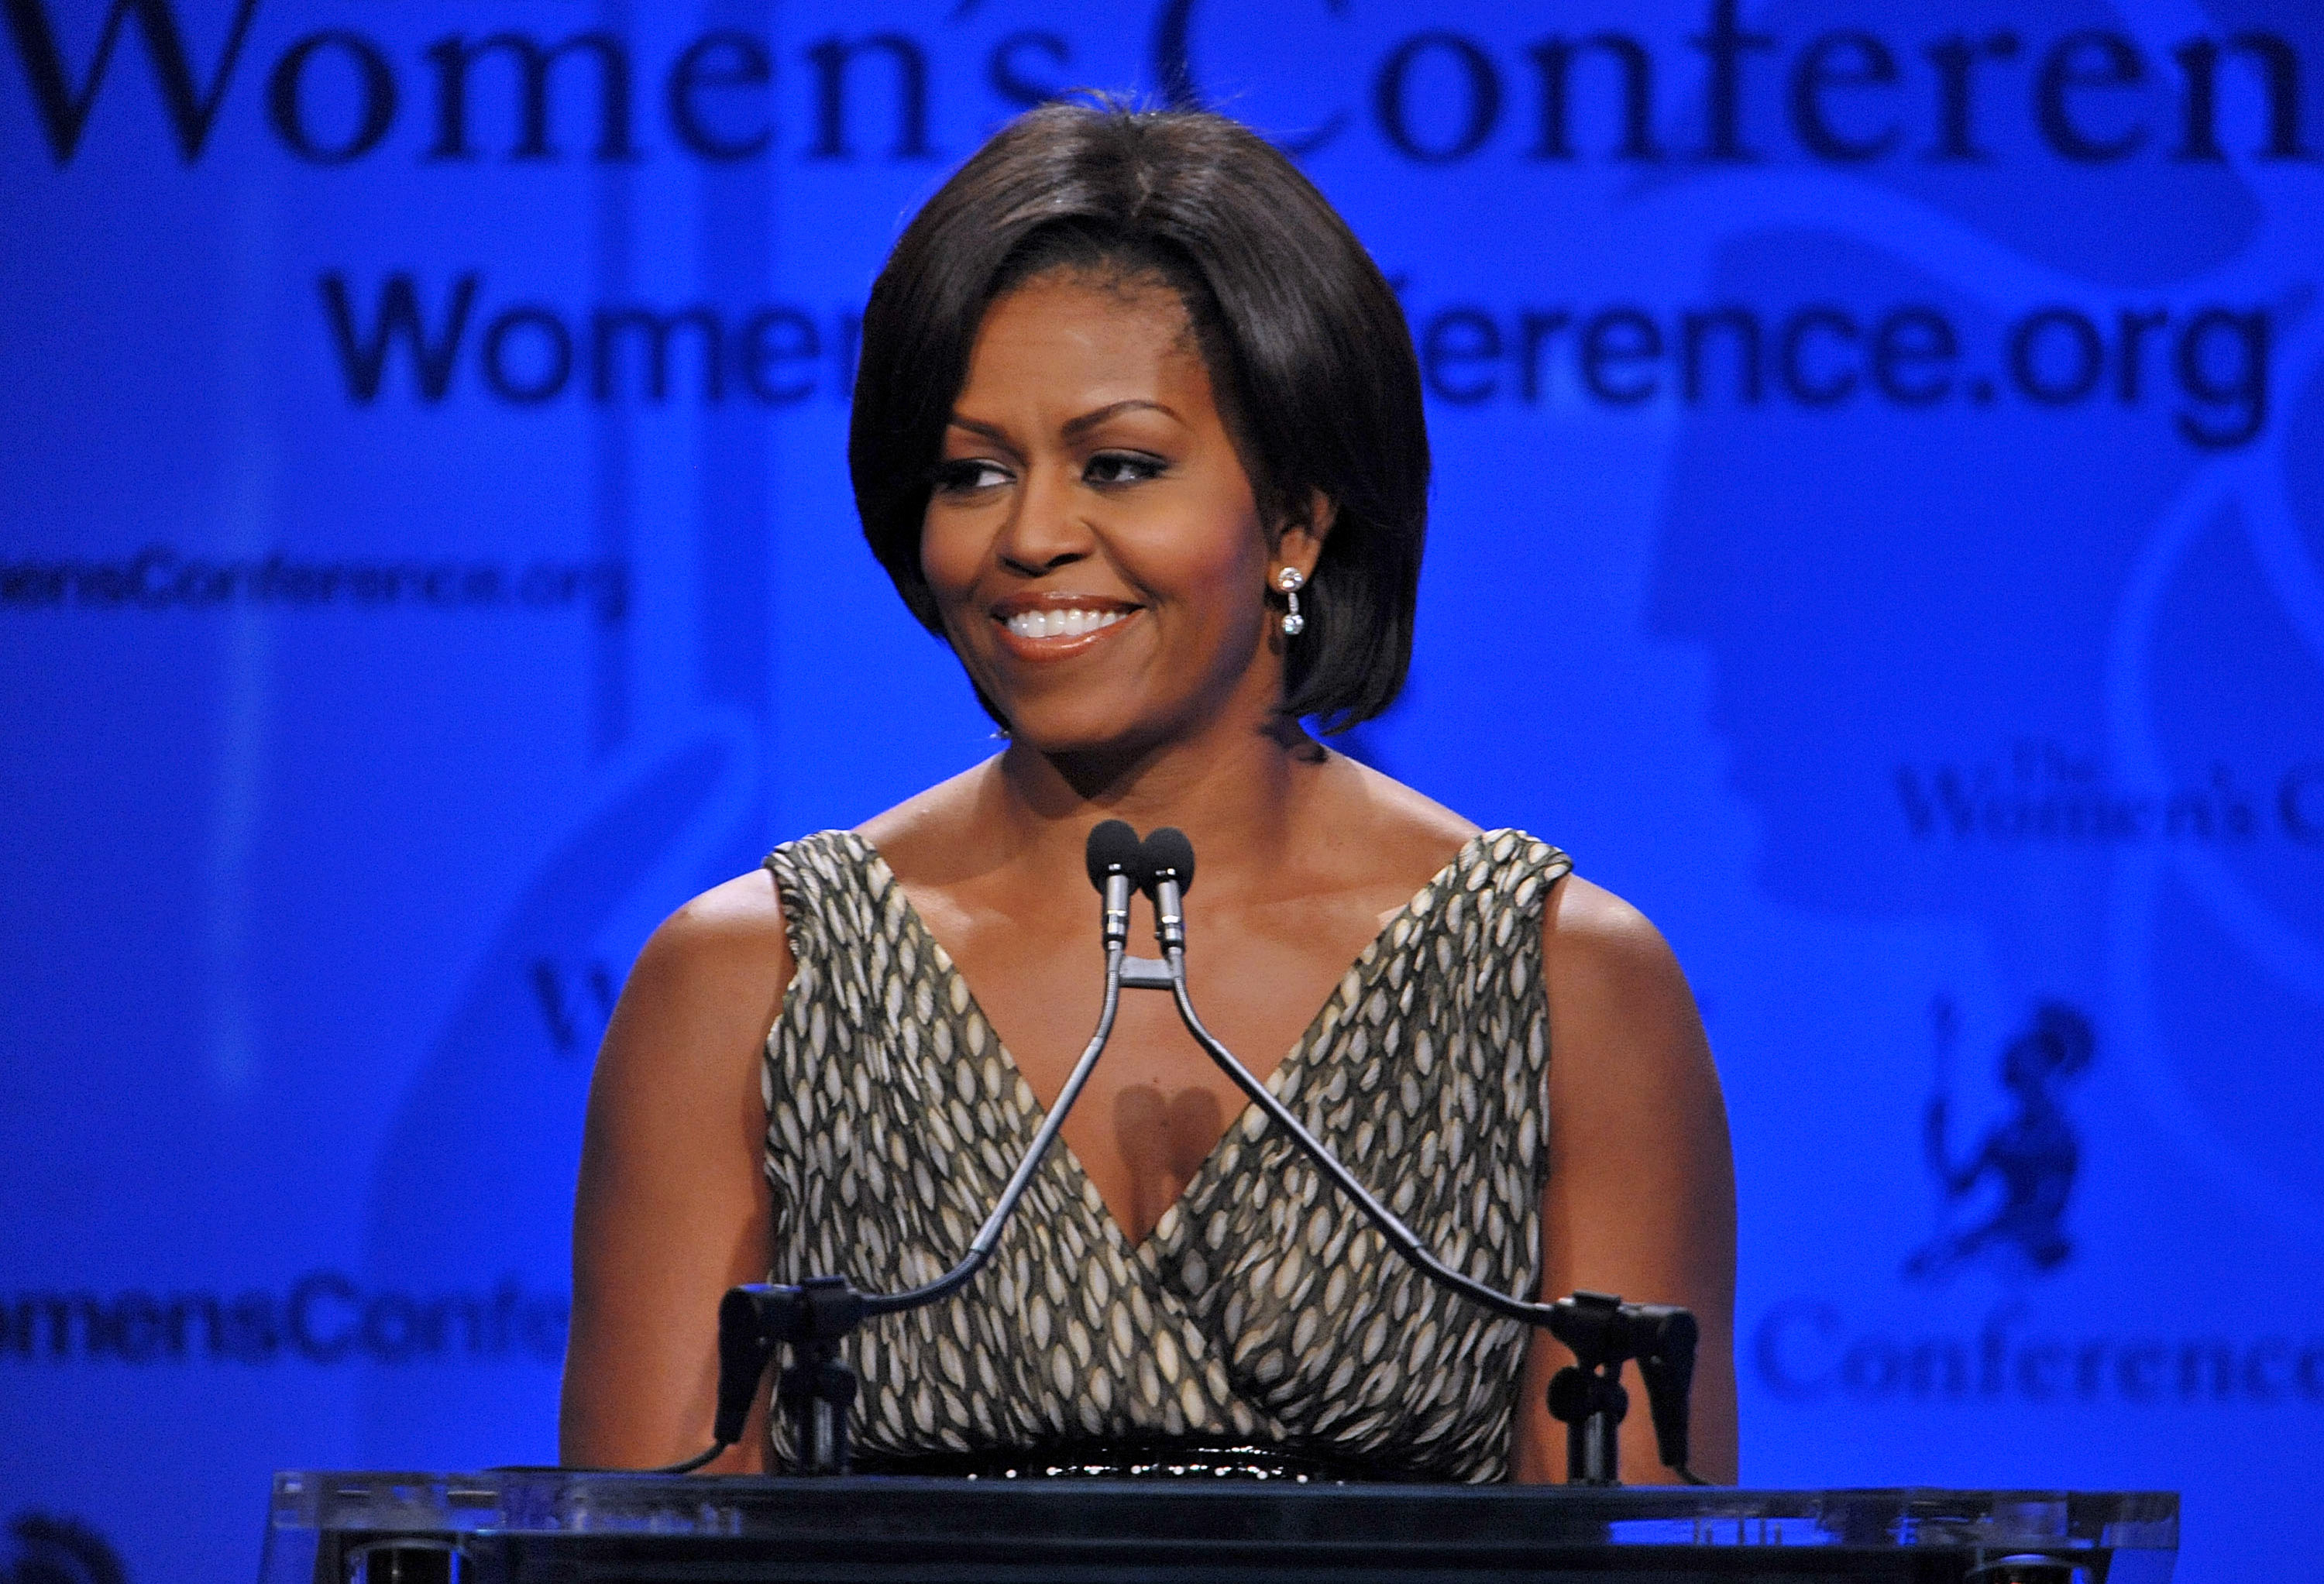 Michelle smiling and standing at a podium with a microphone, addressing an audience, wearing a sleeveless V-neck outfit